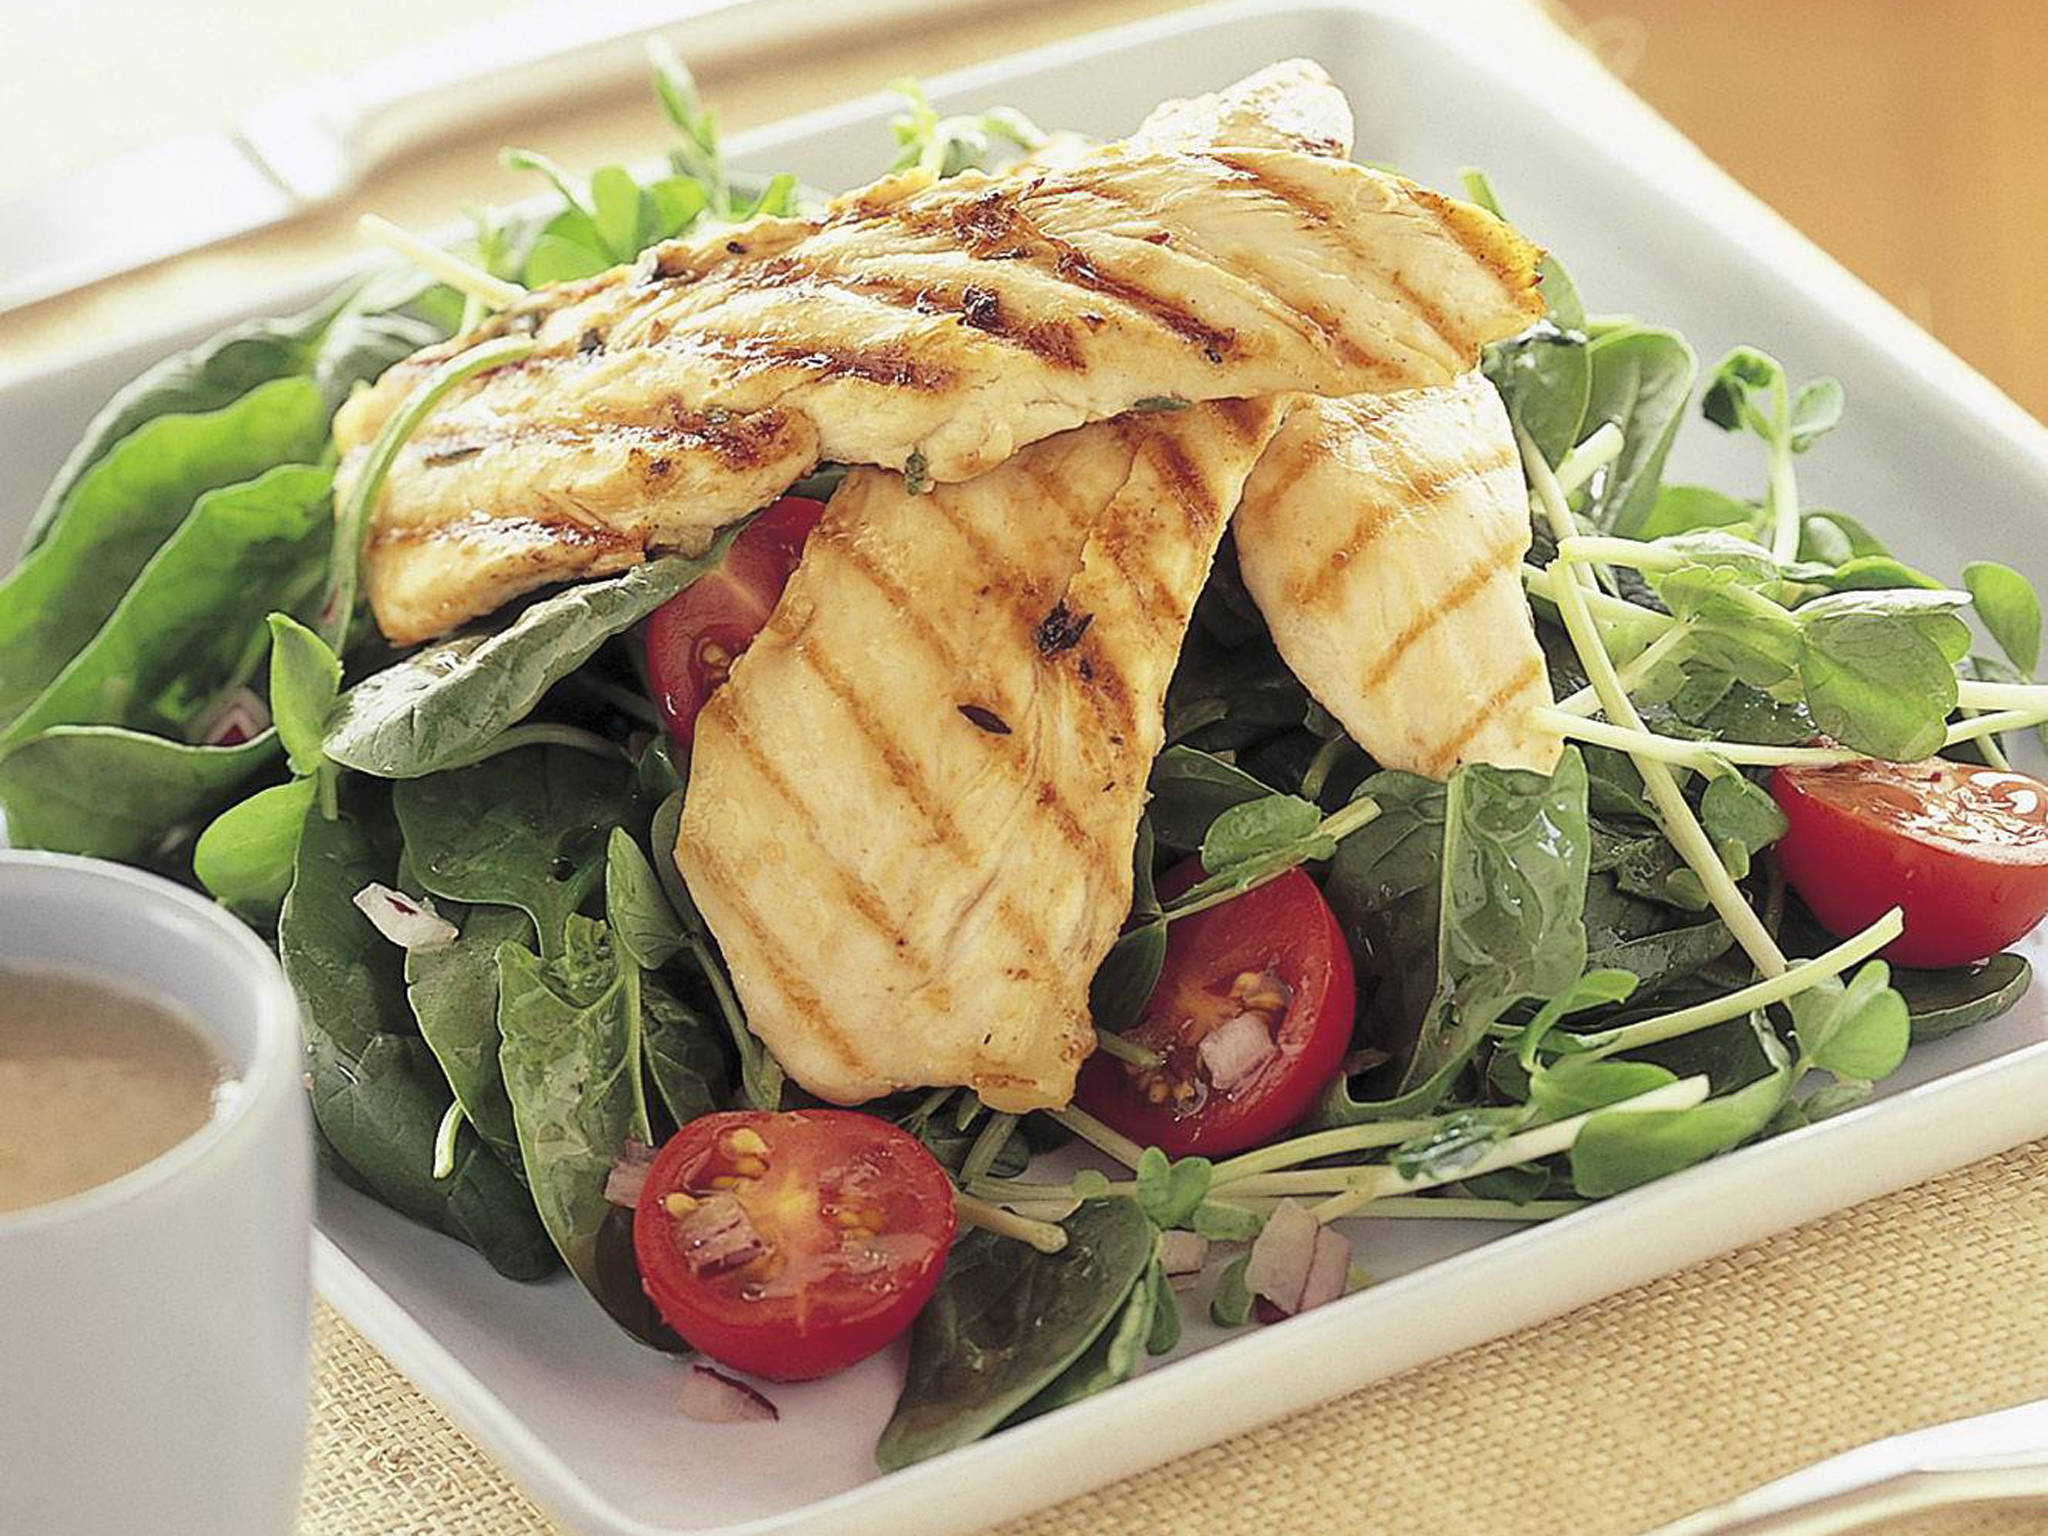 Lemon chicken with baby spinach salad